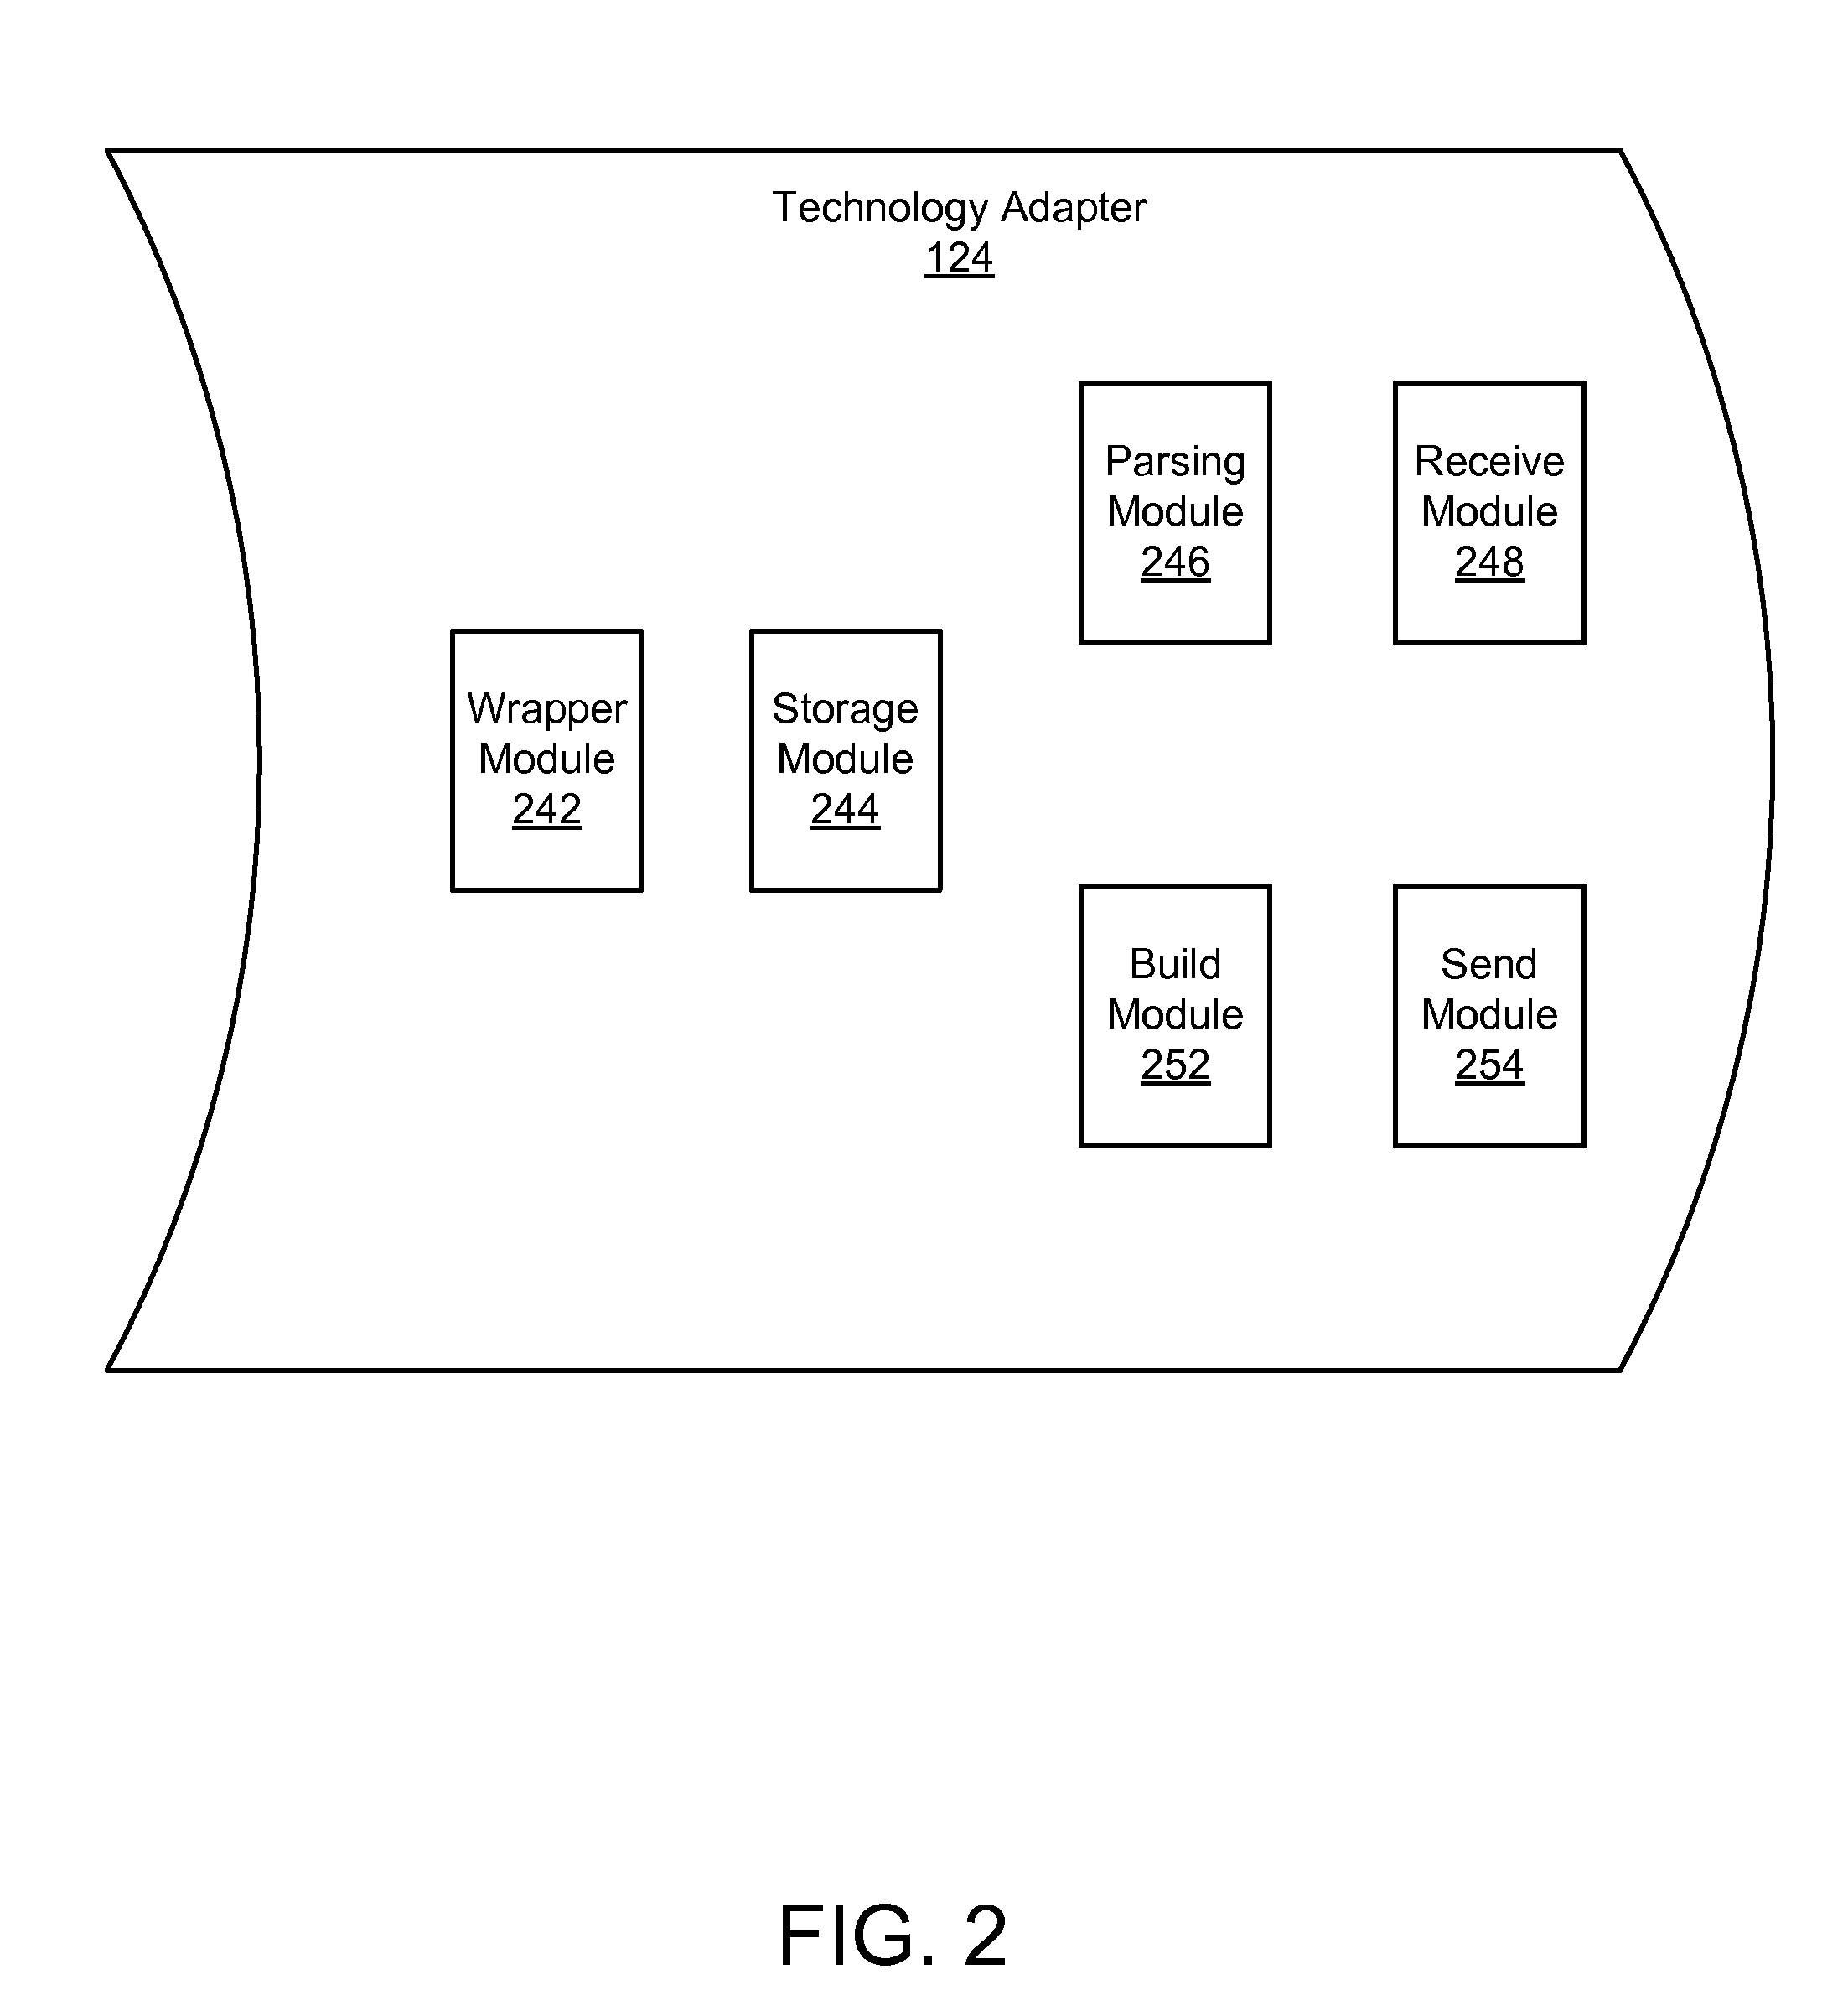 Apparatus, system, and method for setting/retrieving header information dynamically into/from service data objects for protocol based technology adapters